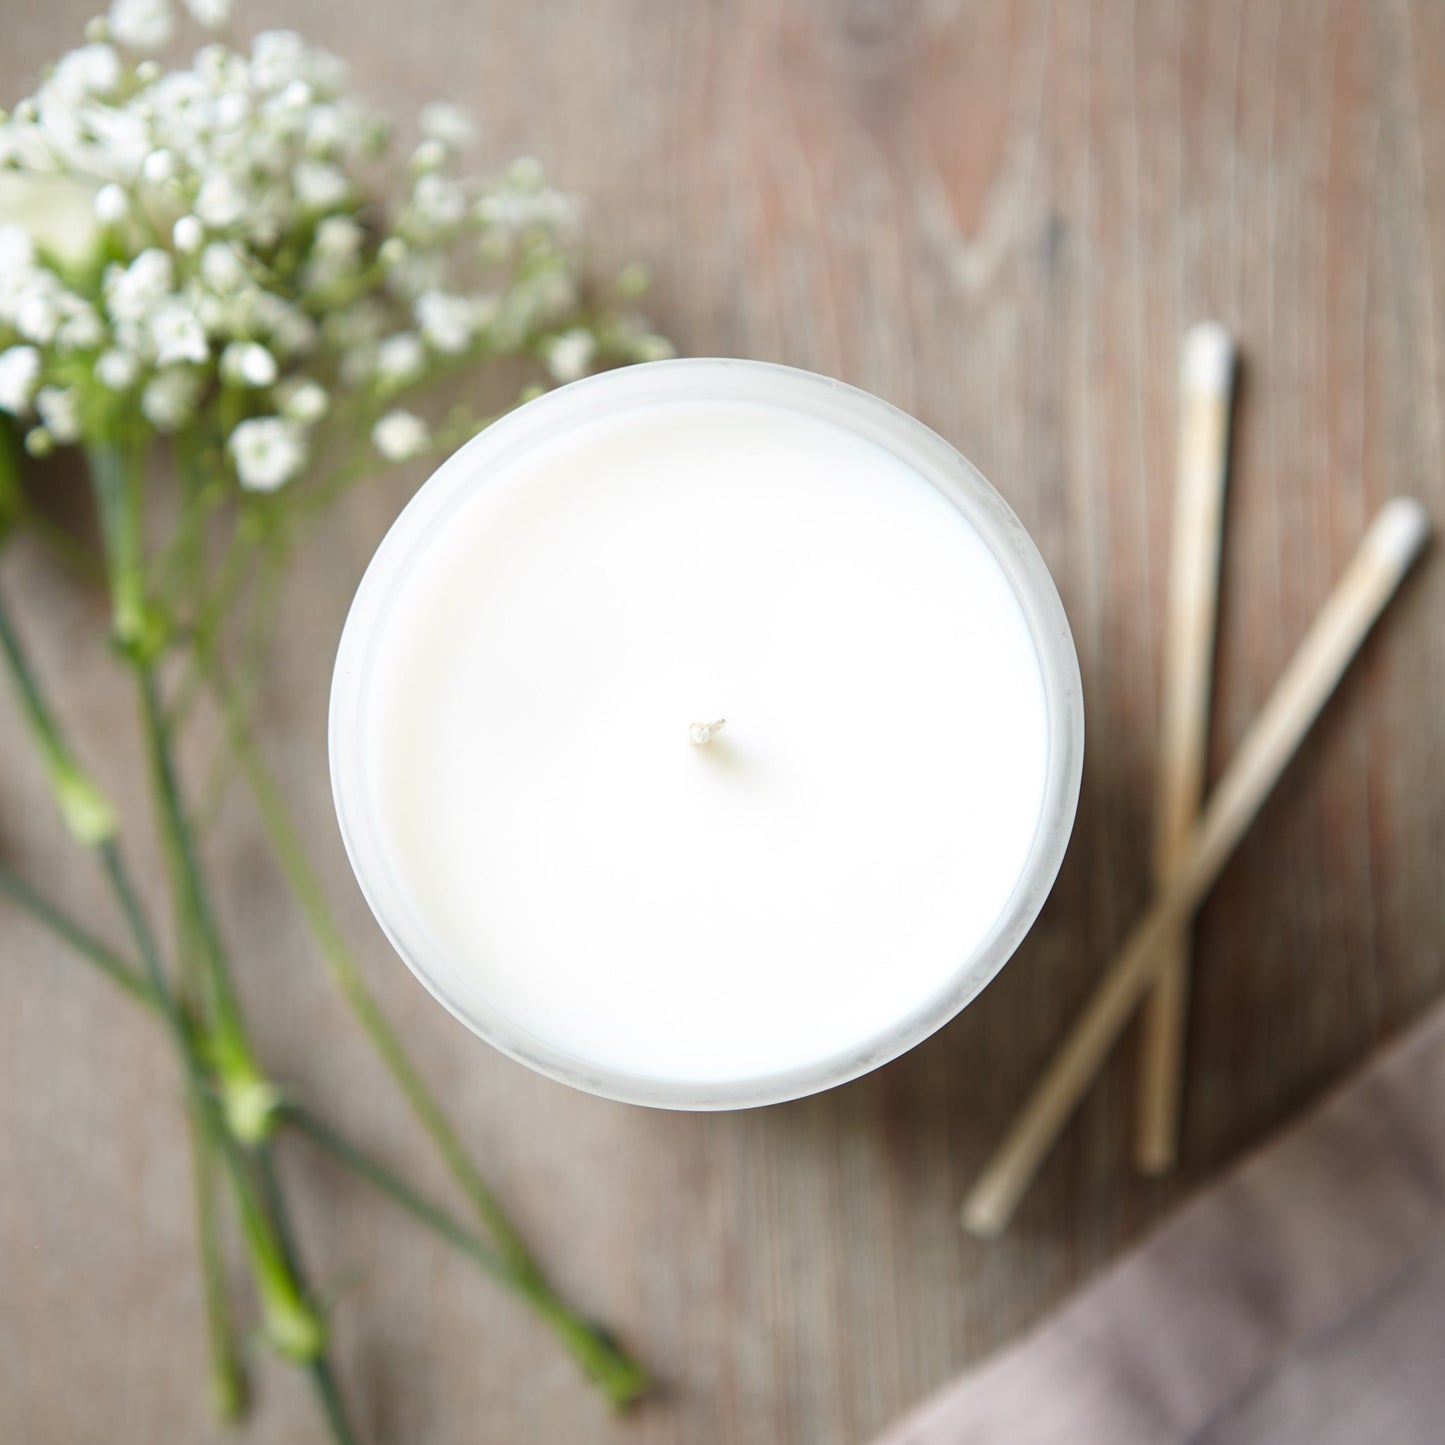 Thank You Gift Minimalist Luxury Scented Candle - Kindred Fires